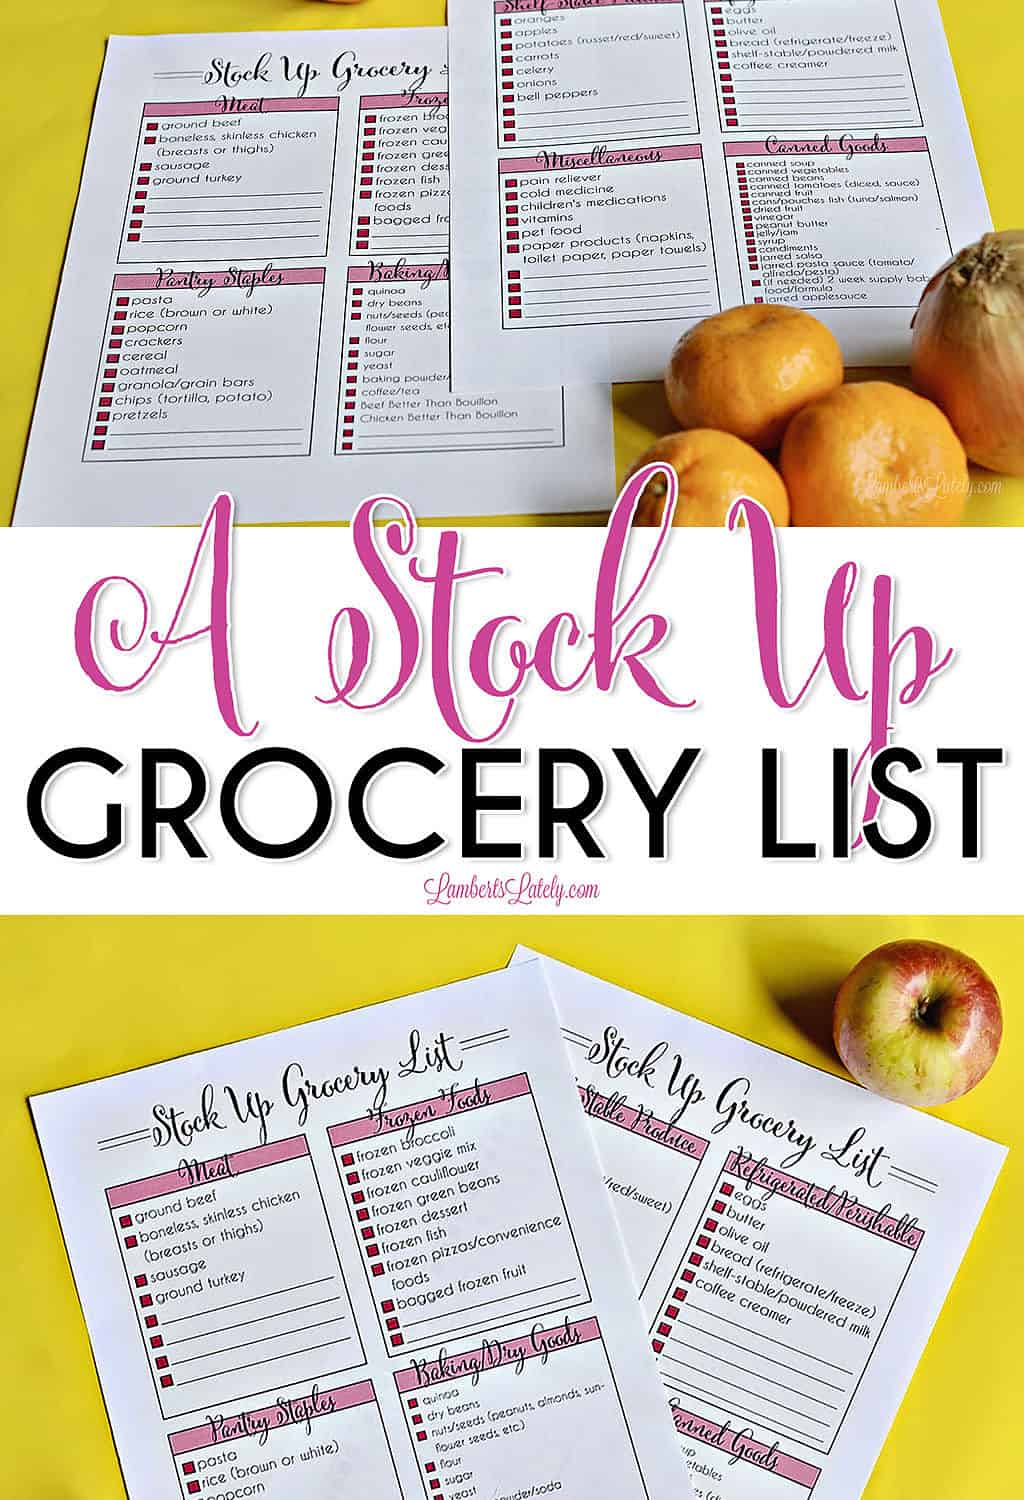 A stock up grocery list.